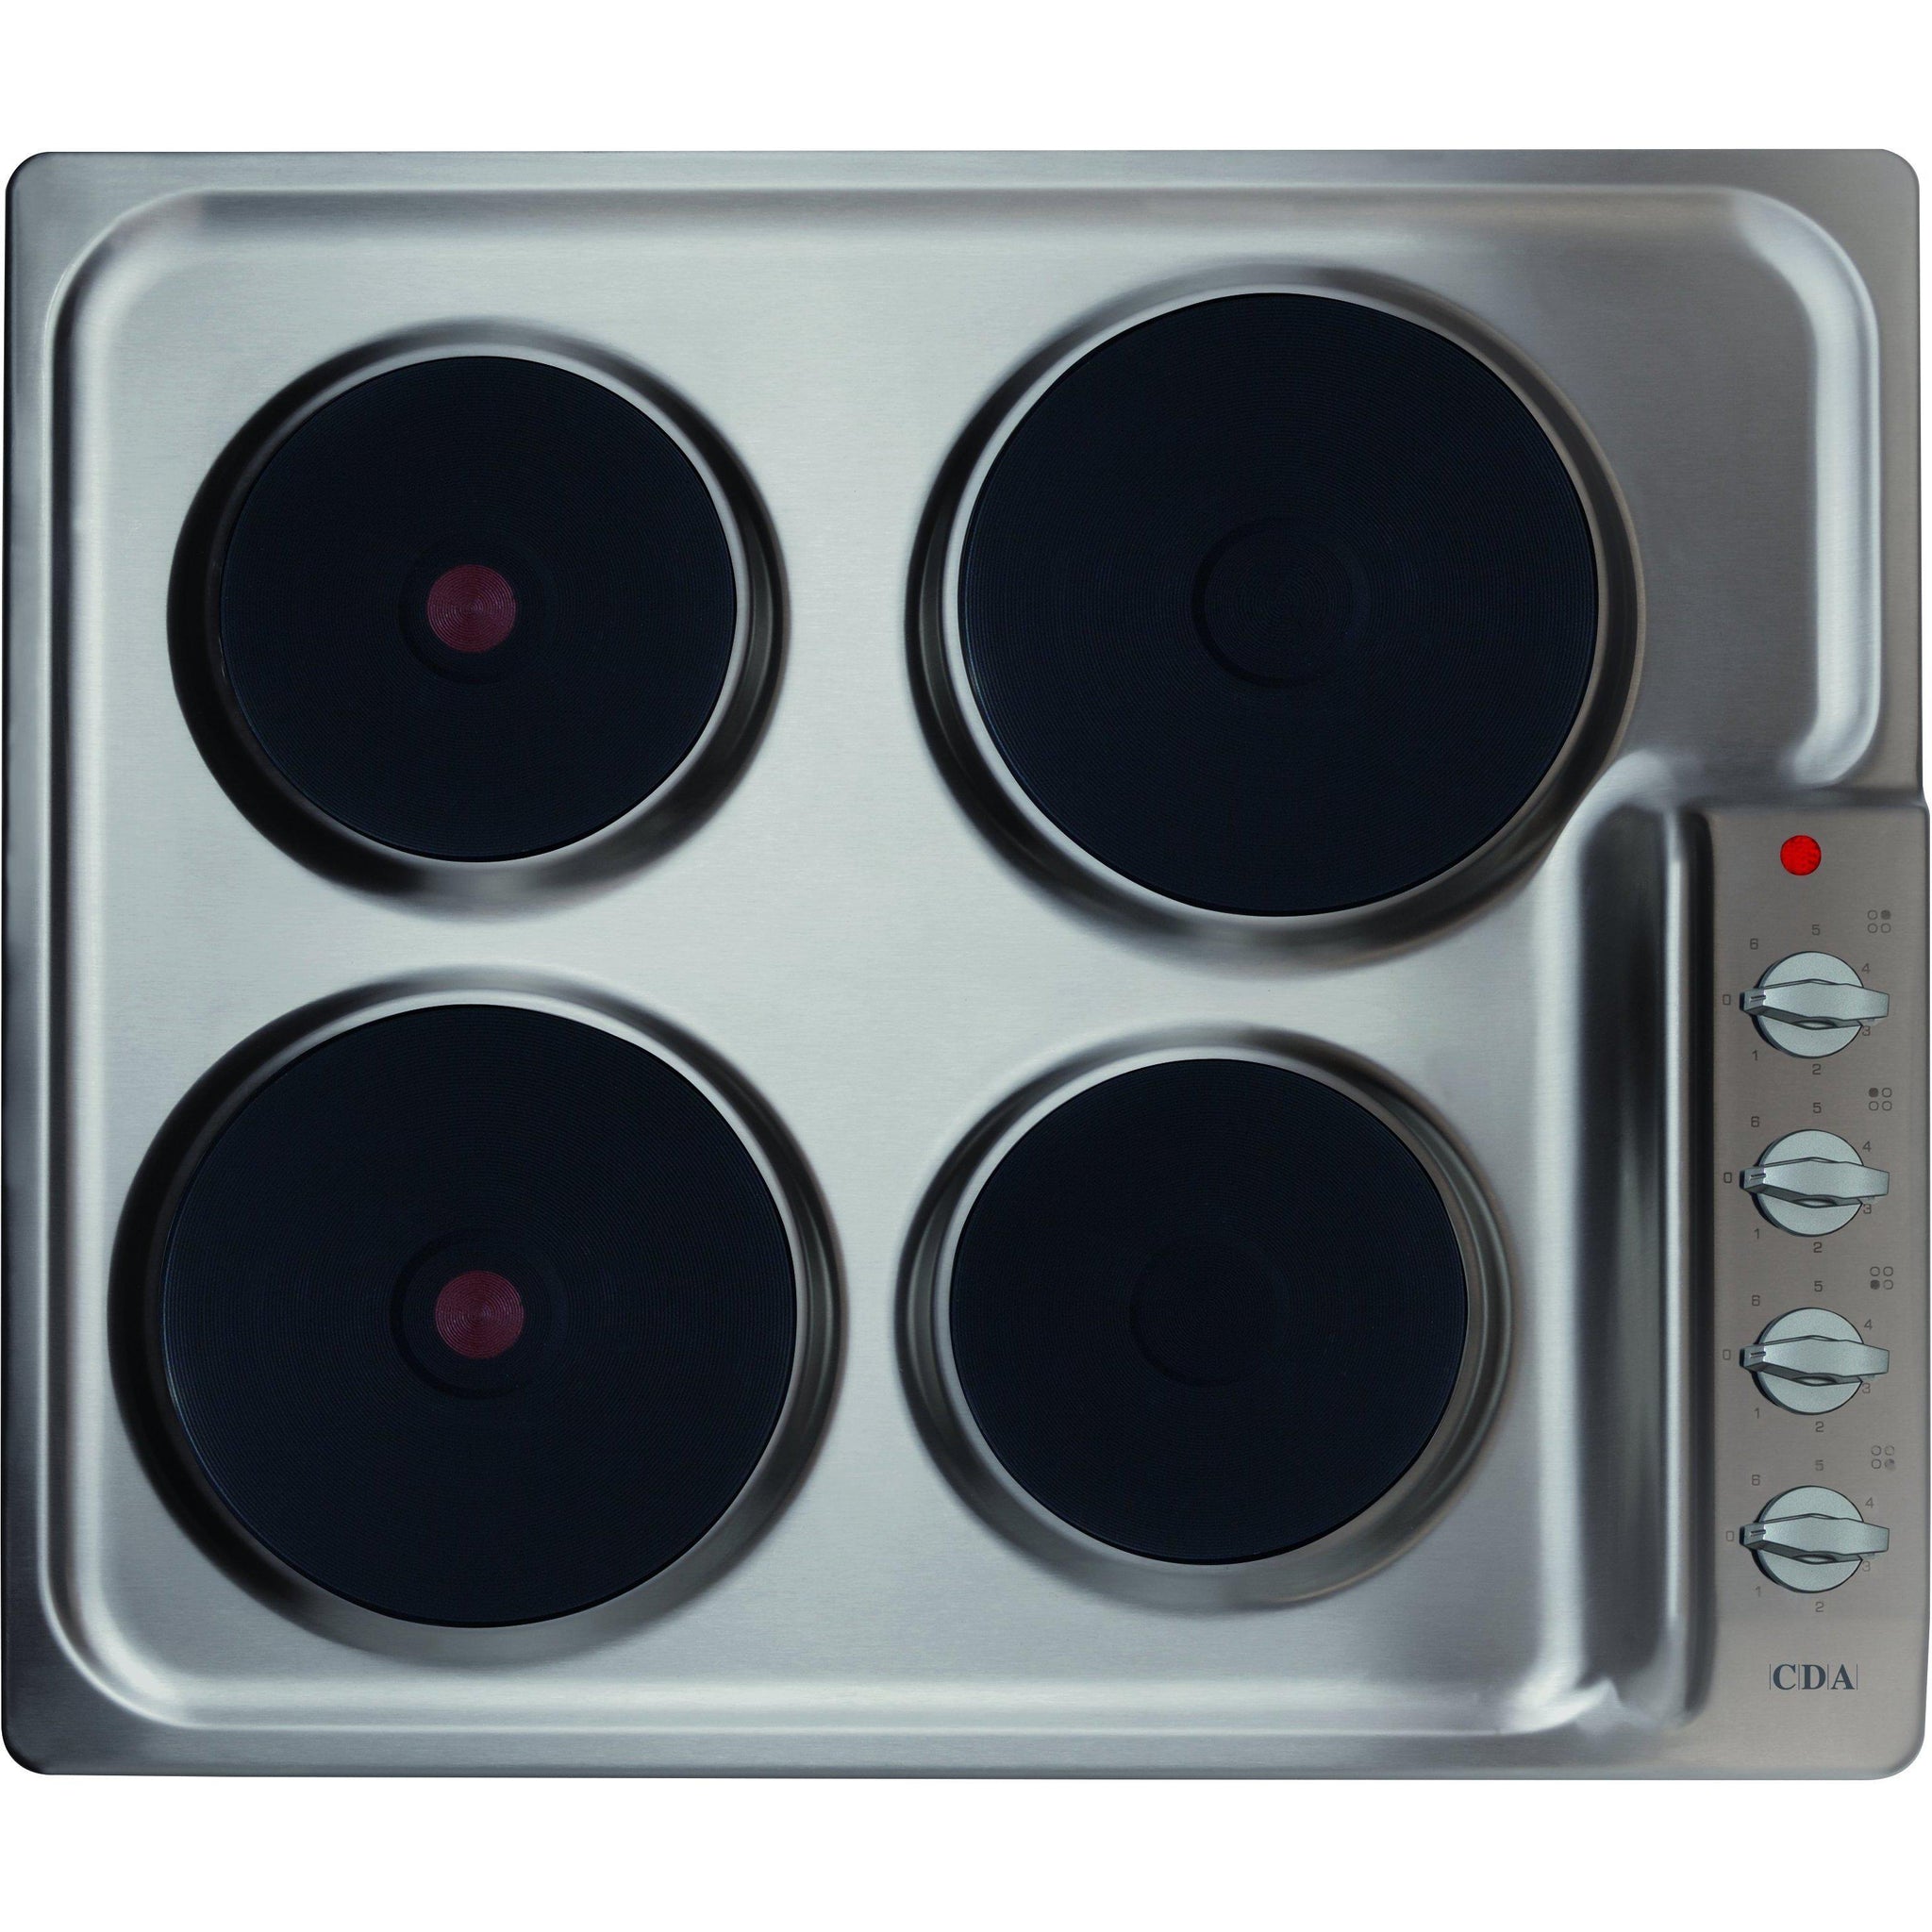 Cda He6051ss Four Plate Electric Hob Stainless Steel